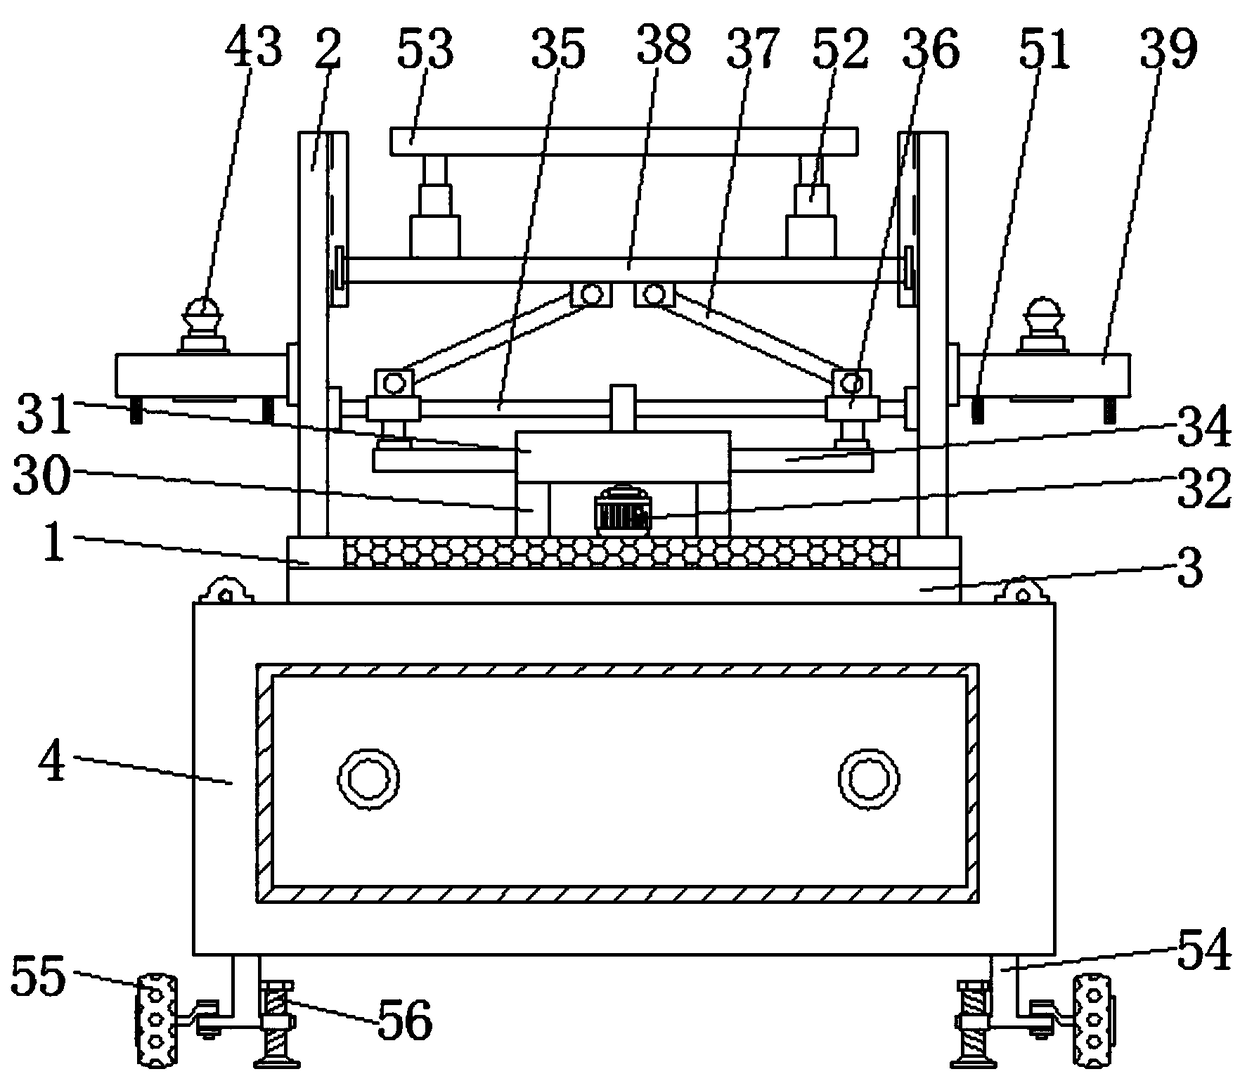 Assembling type lifting device for building